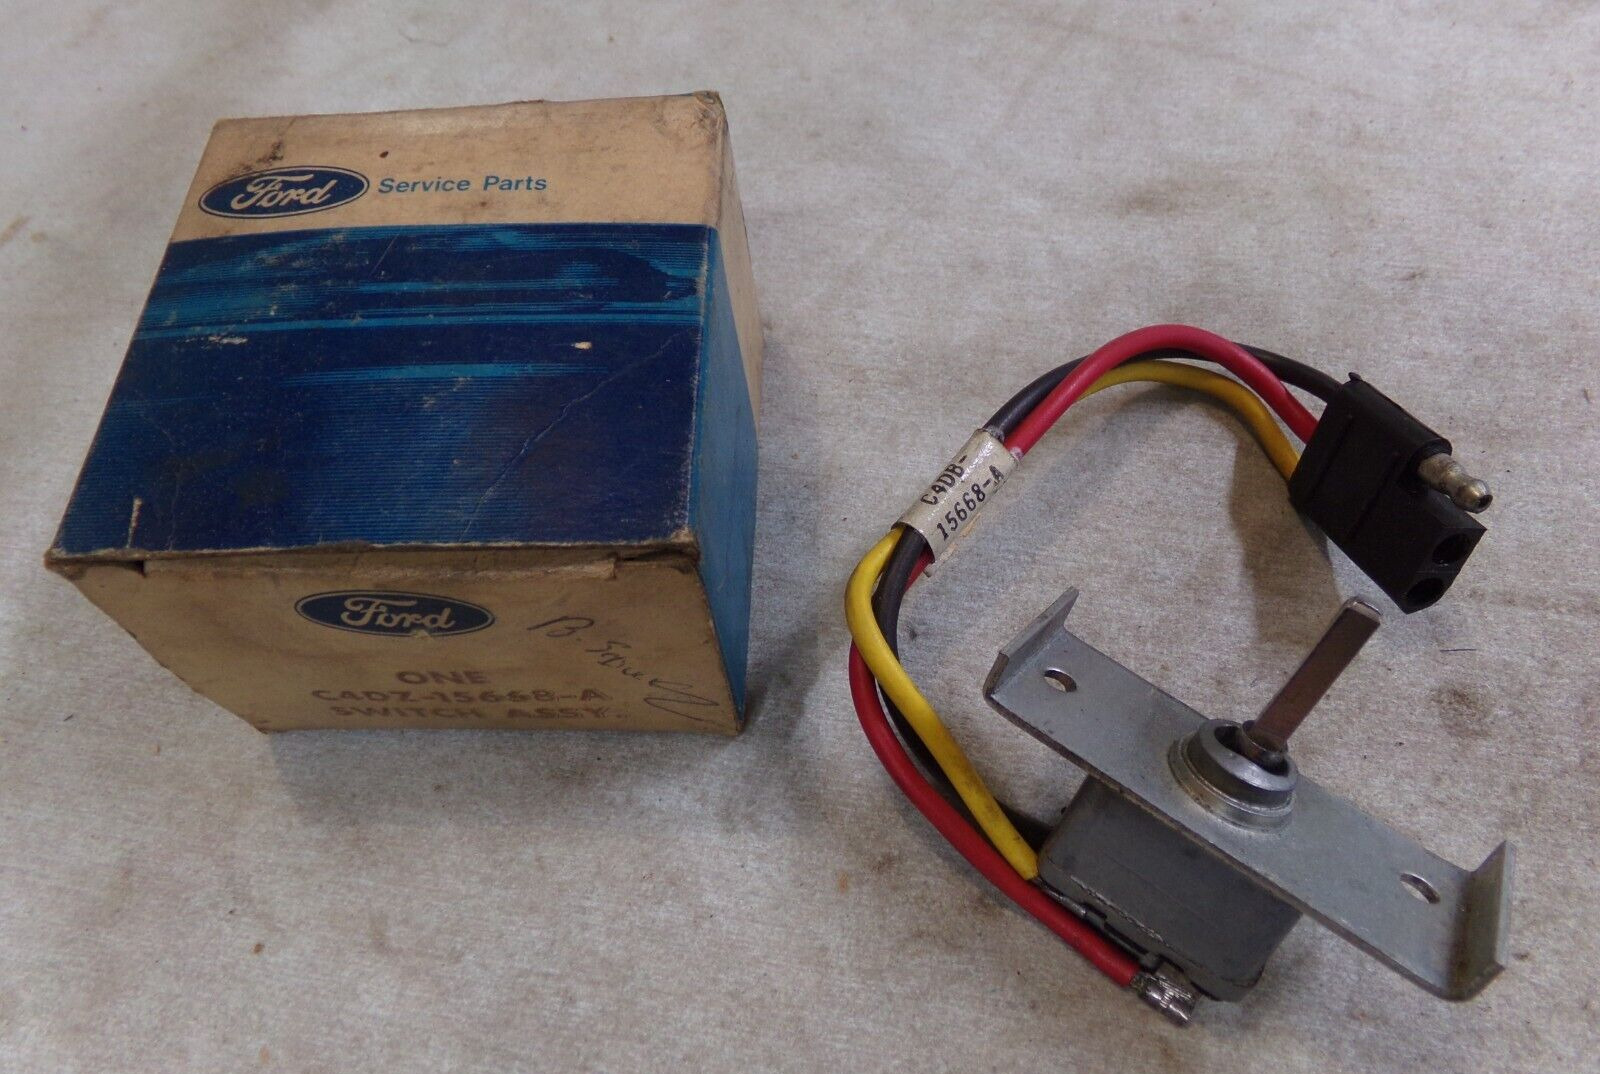 Switch Assembly, Convertible Top, 1965/66 Mustang, 1964 Falcon, Comet, NOS